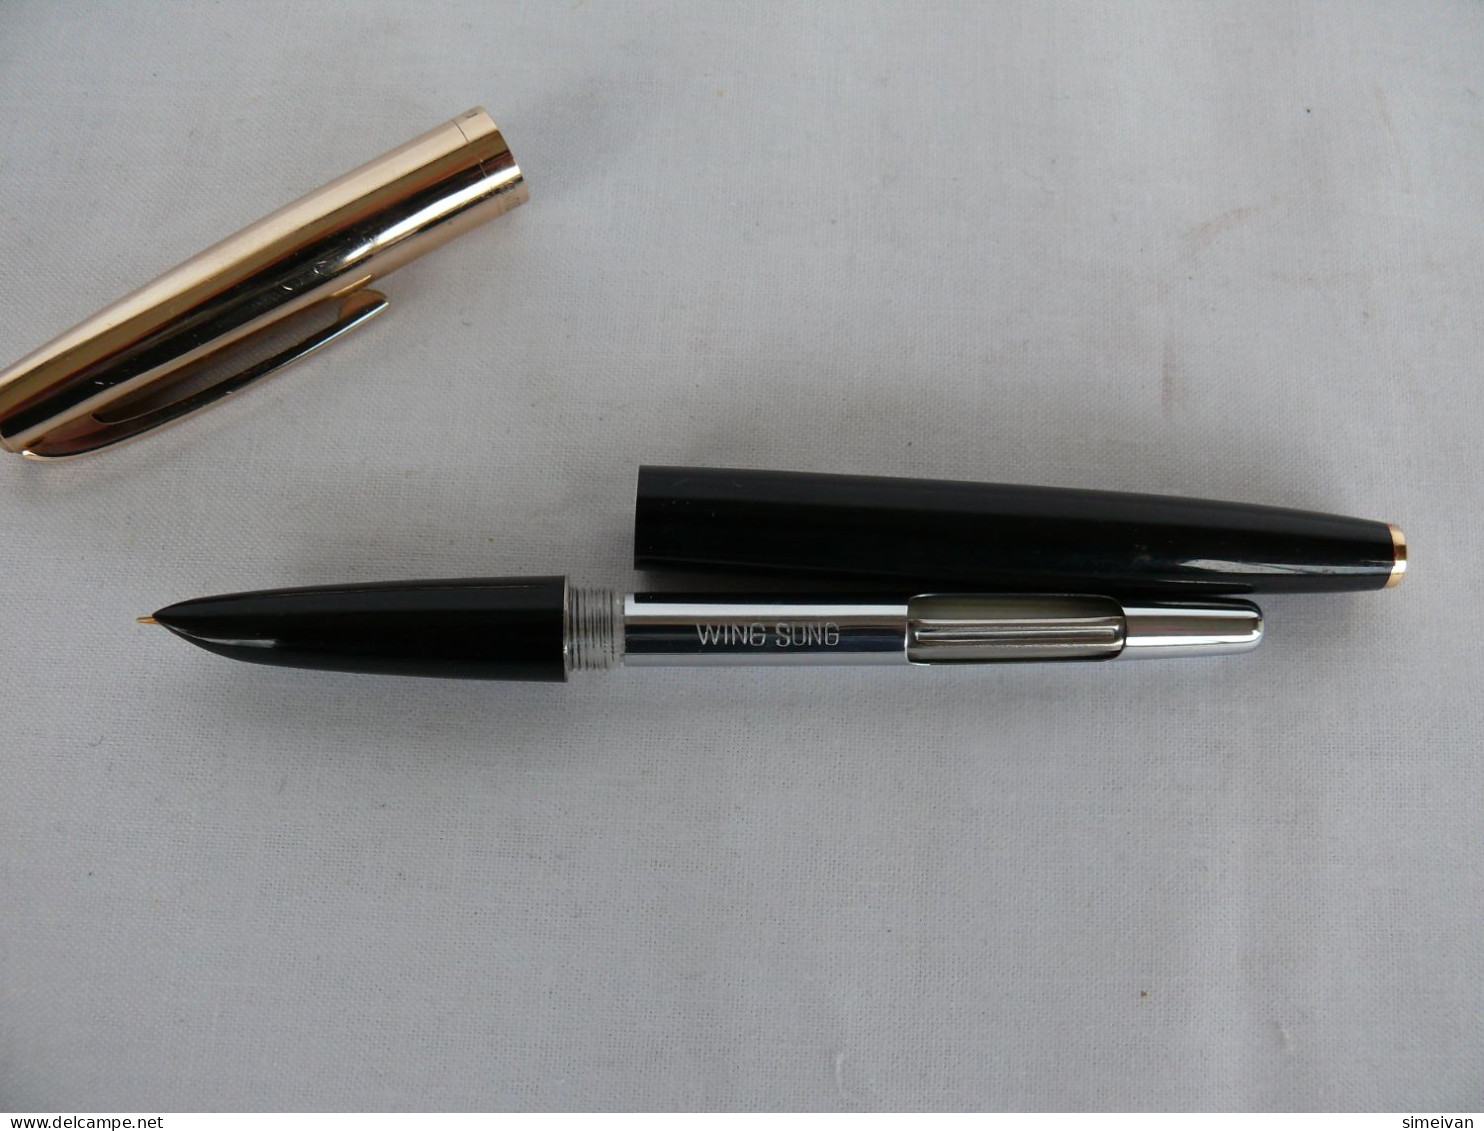 Vintage Wing Sung Fountain Pen Black Body Gold Cap Made in China #2026